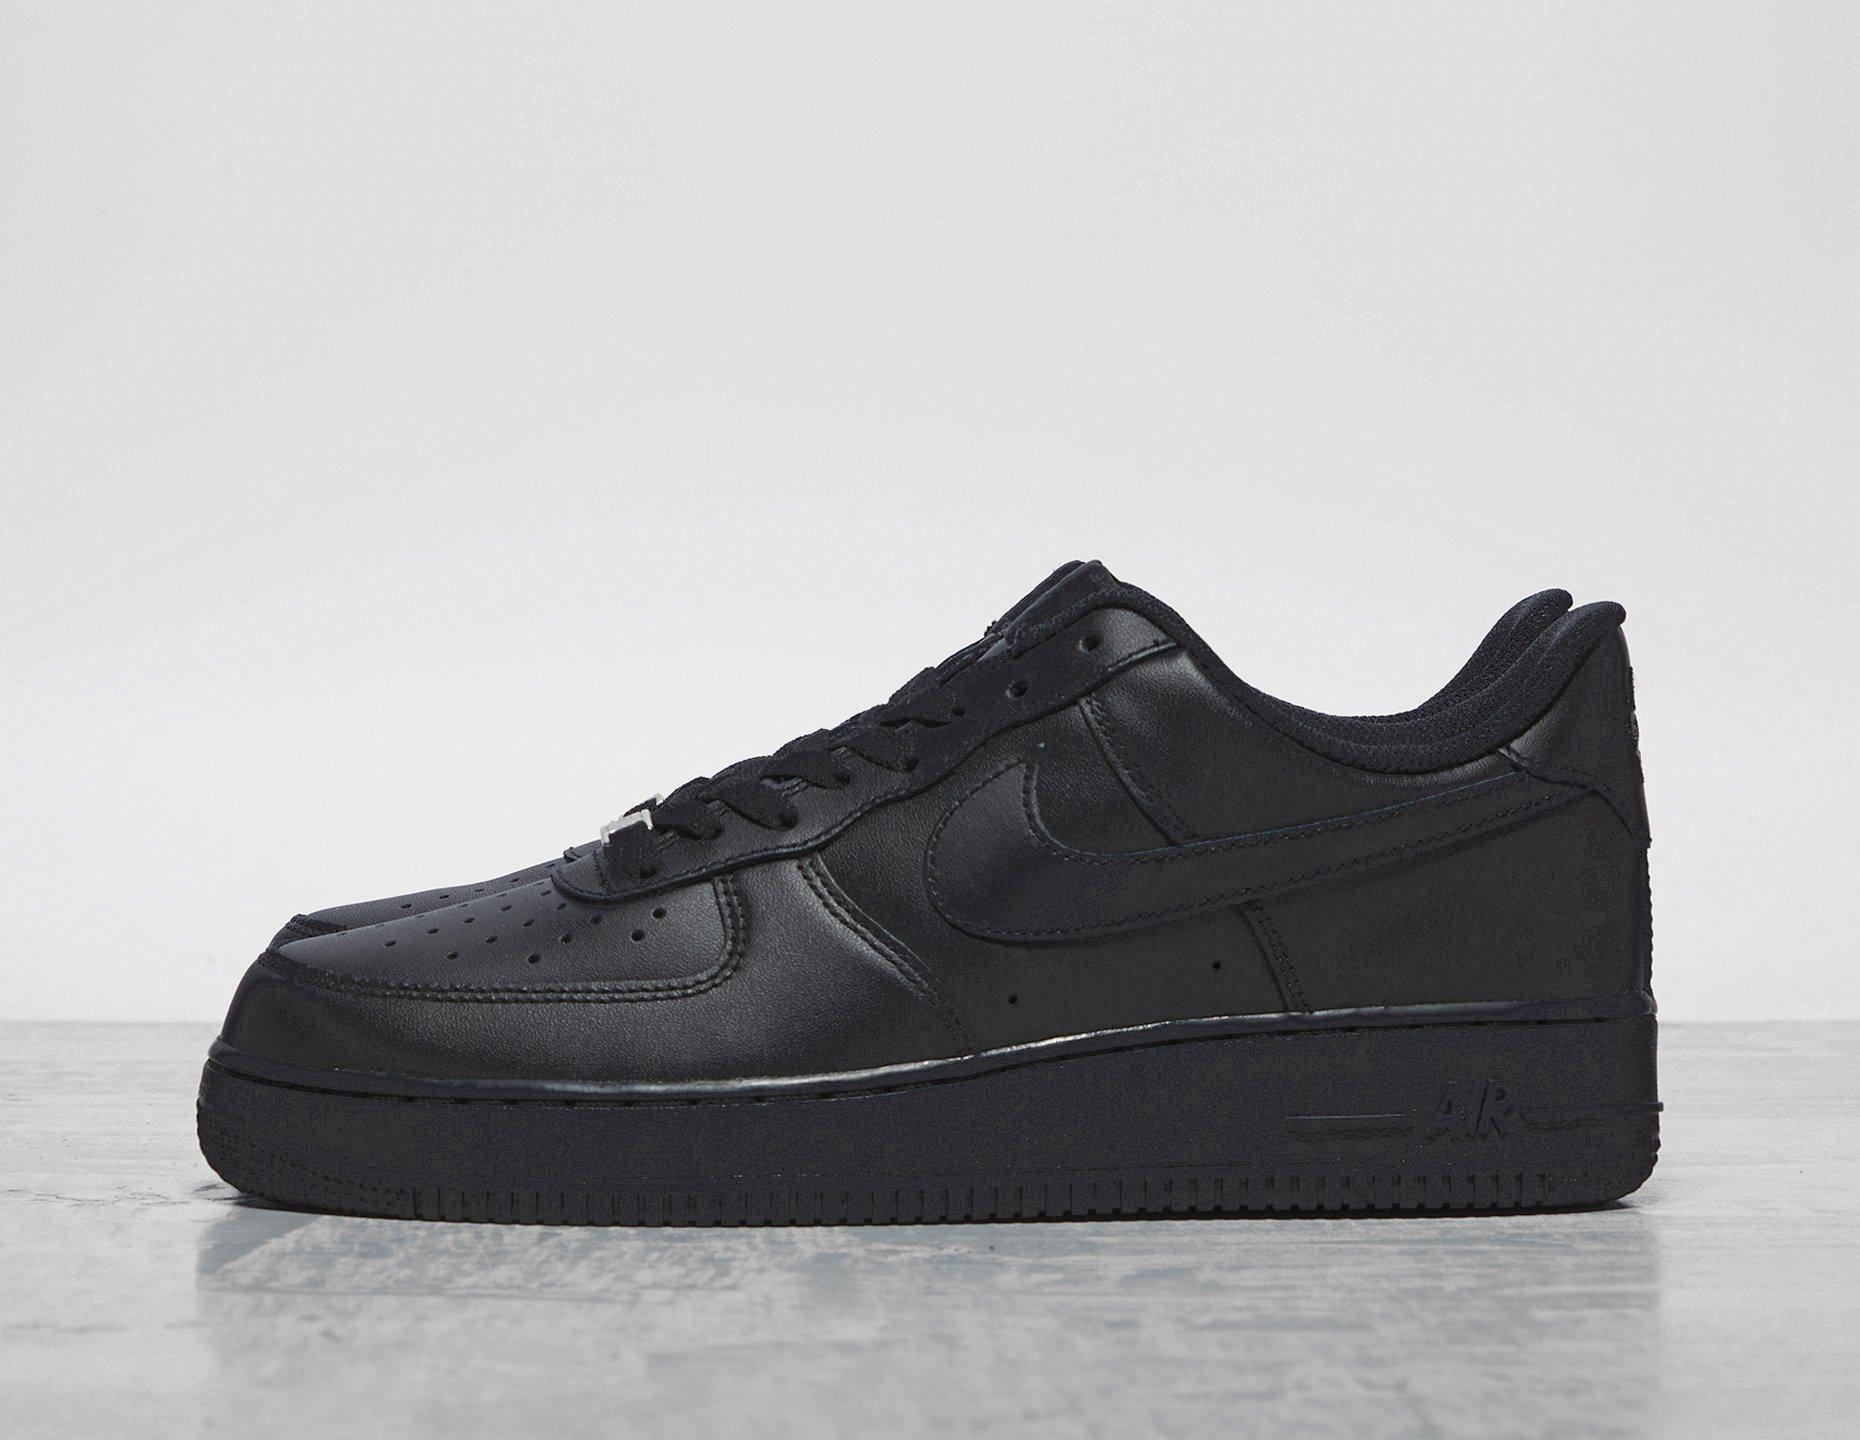 Gum Sole Croc Embossed Air Force 1 Low